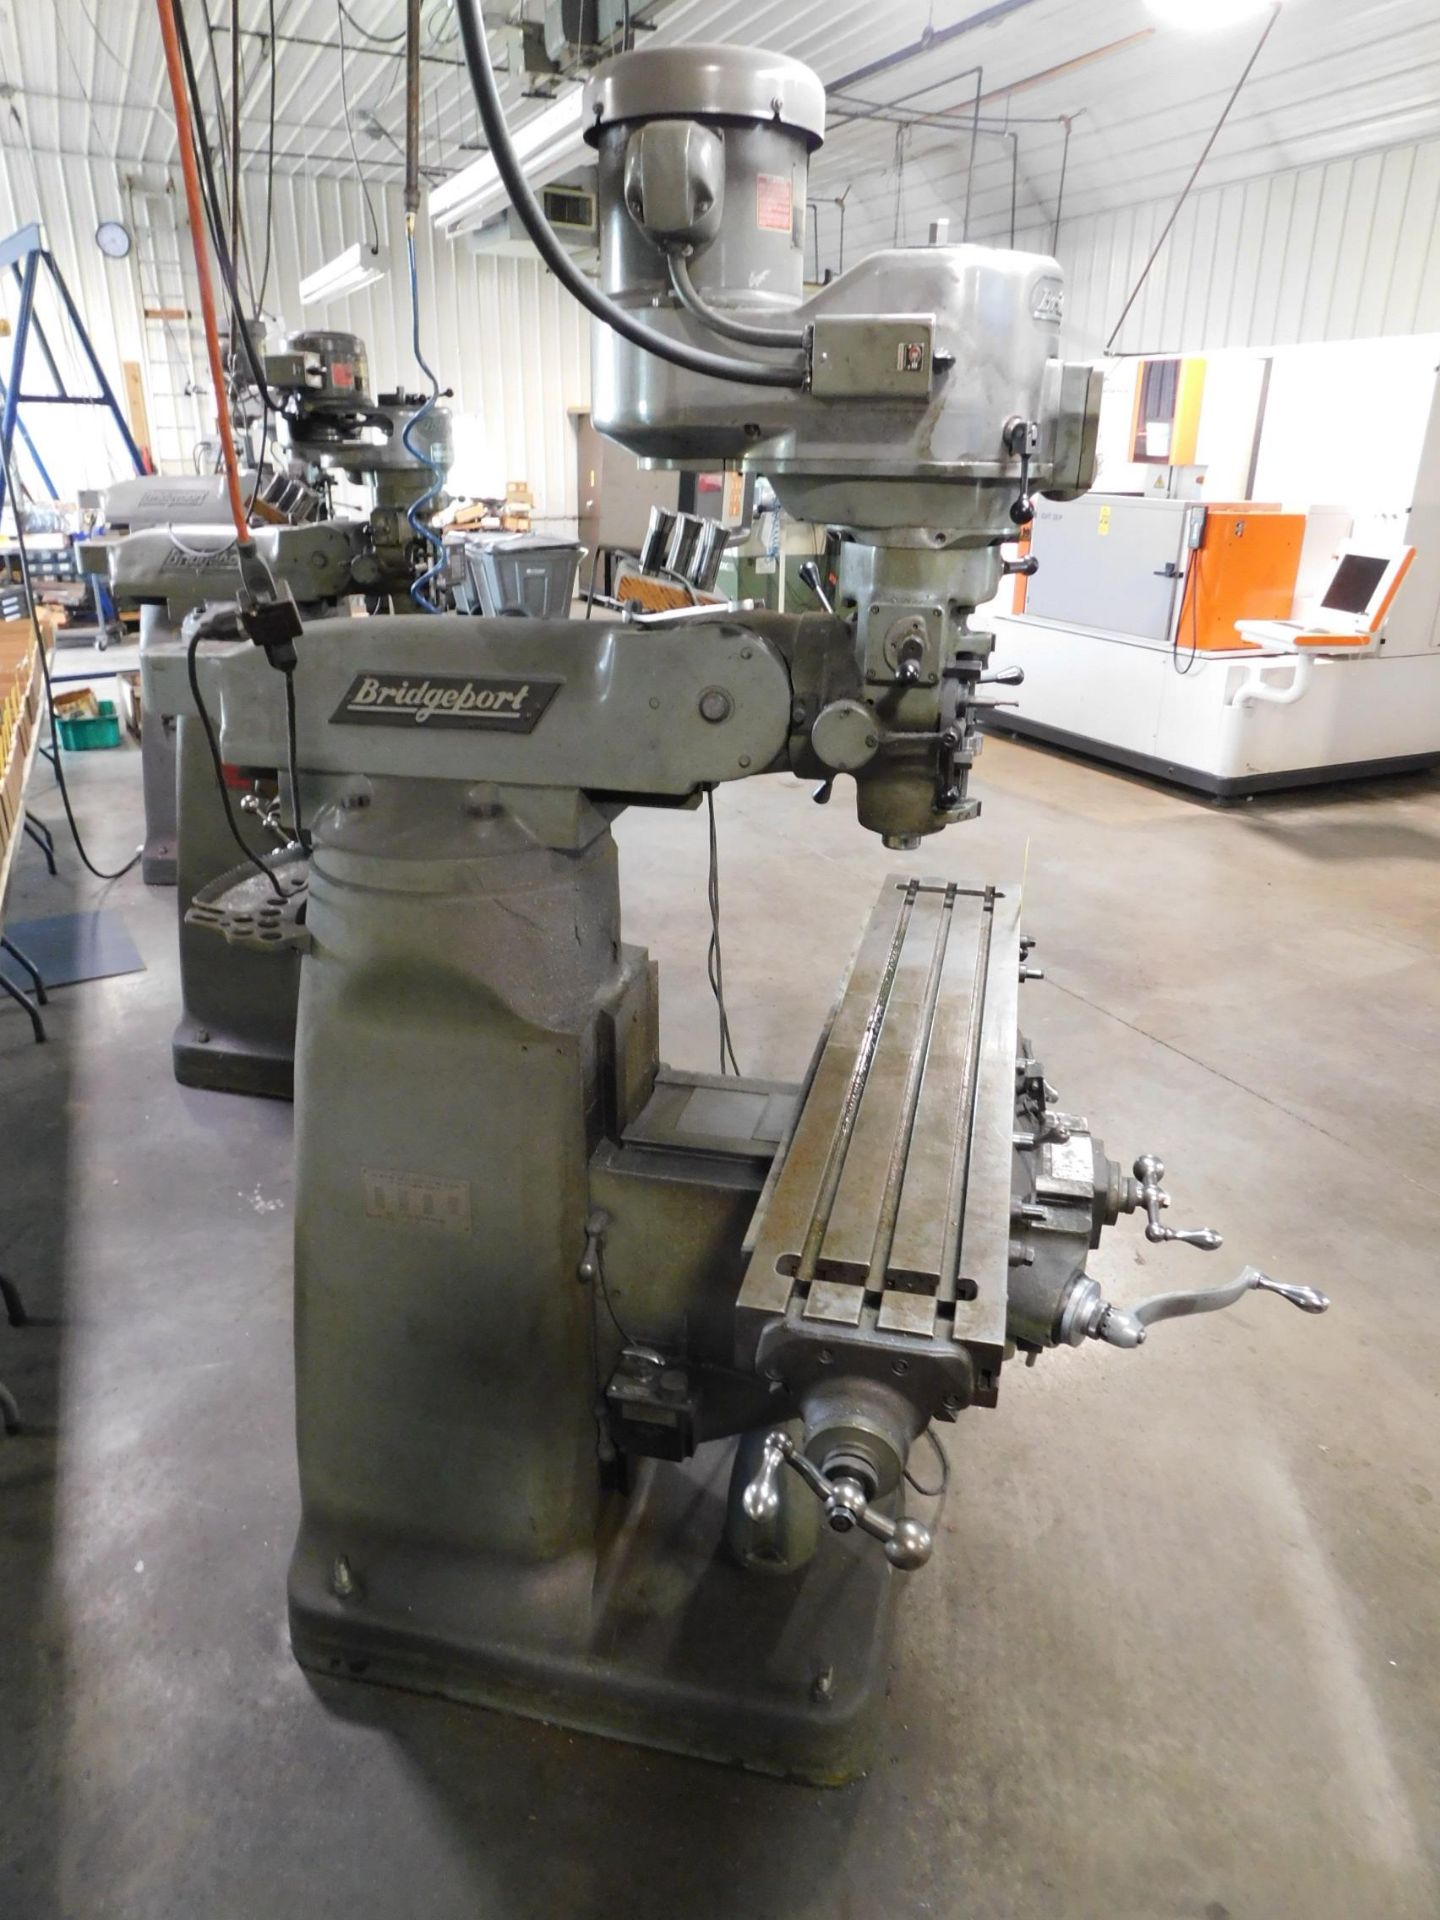 Bridgeport Series I 2H.P. Vertical Mill sn# 12BR235748, 9"X48" Table, Servo Table Powerfeed, - Image 10 of 11